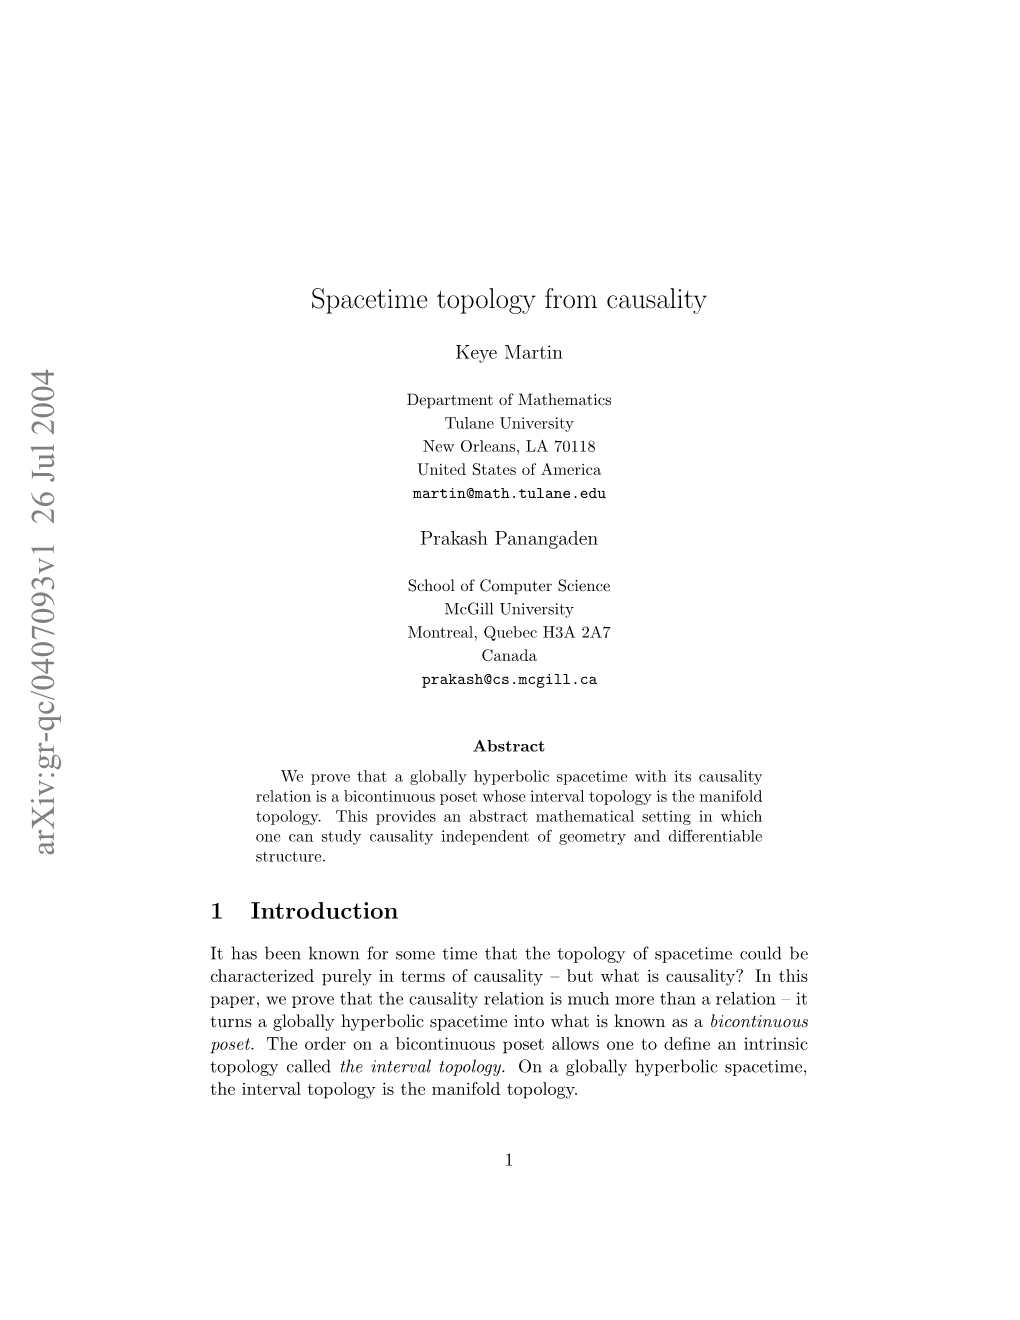 Spacetime Topology from Causality